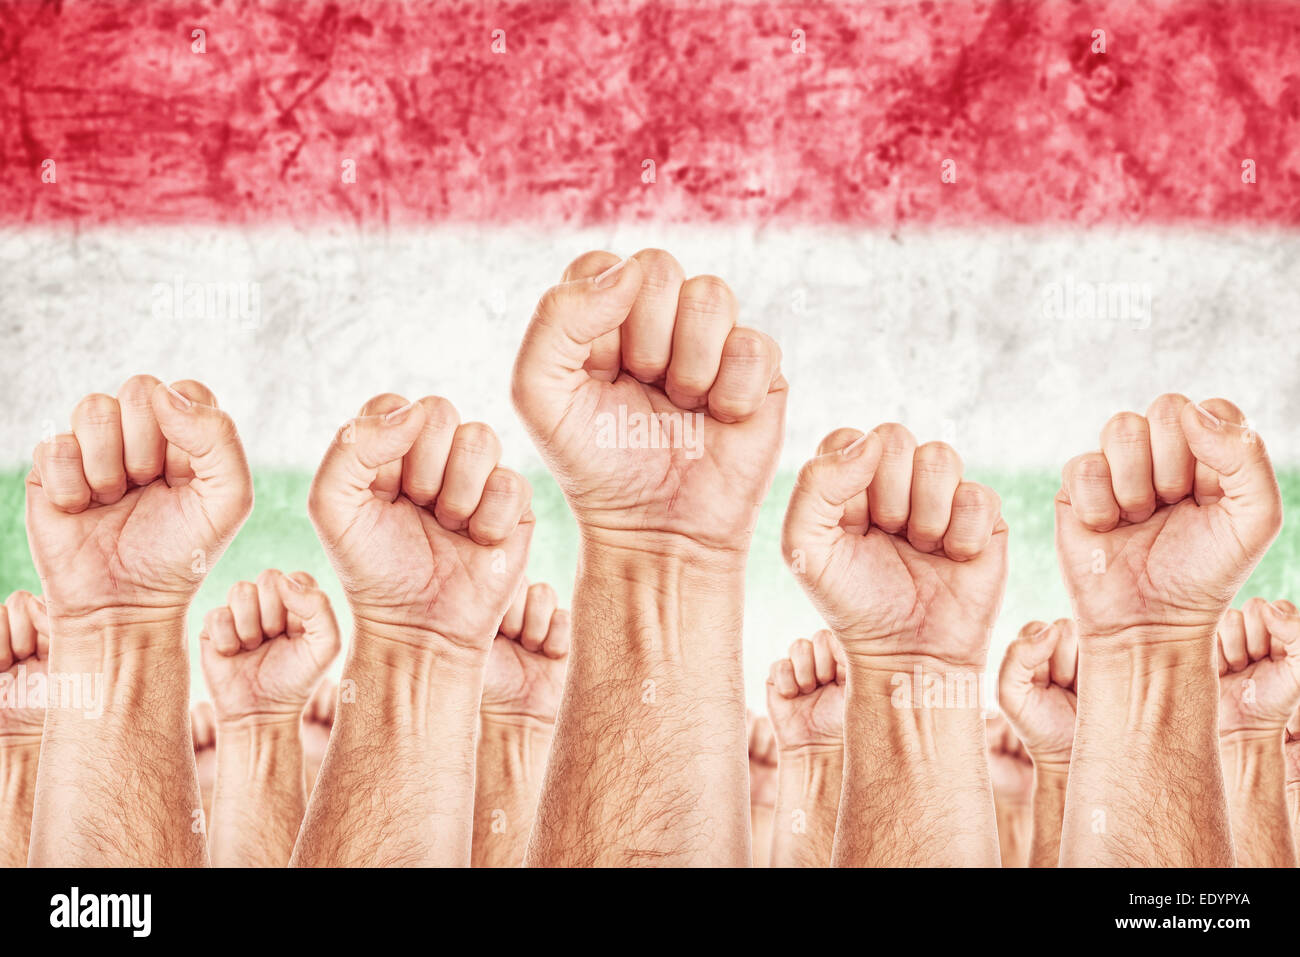 Hungary Labor movement, workers union strike concept with male fists raised in the air fighting for their rights Stock Photo